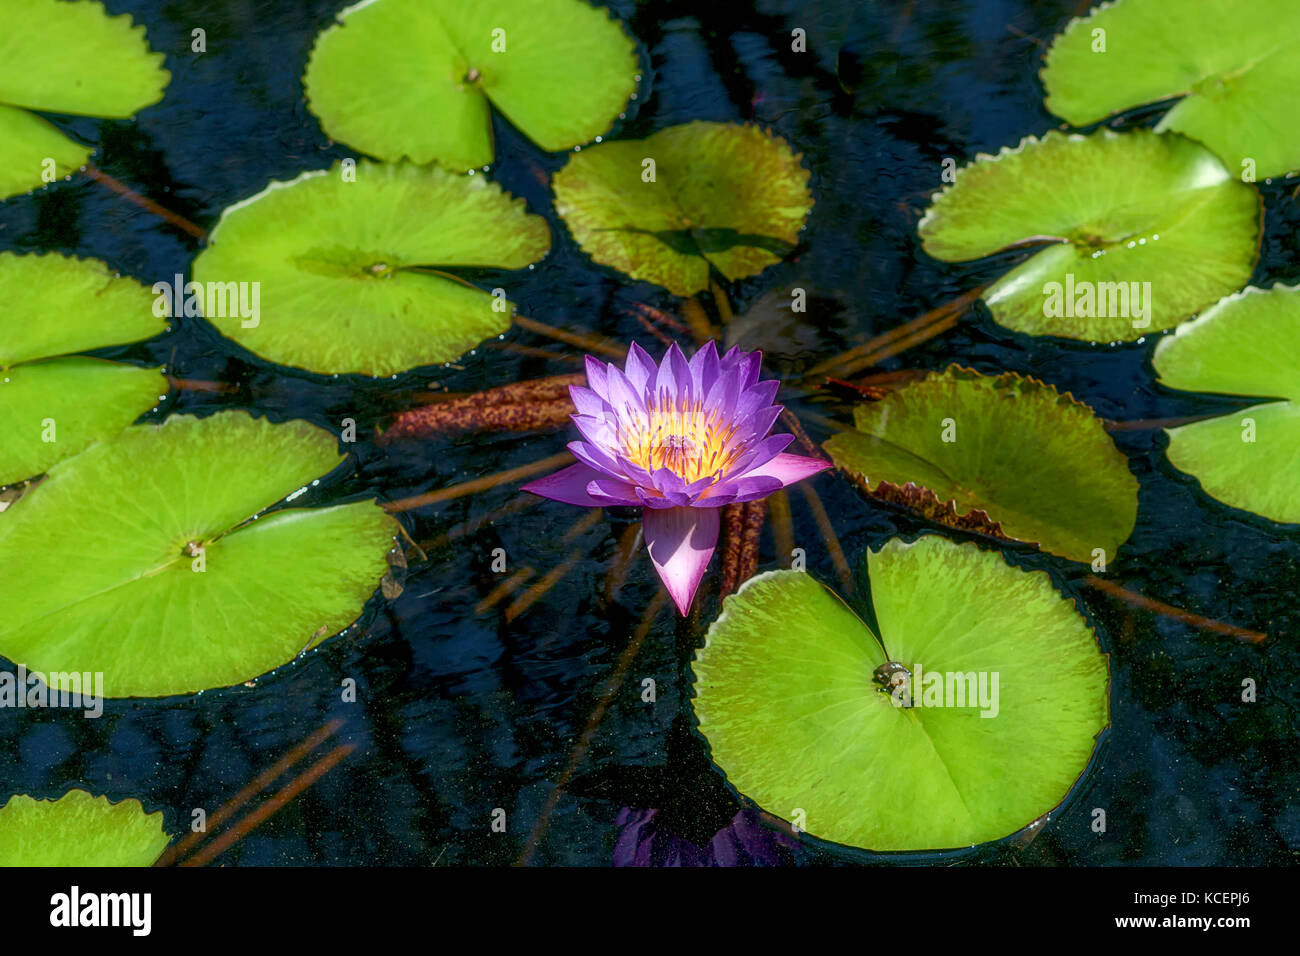 The lily pads are in full bloom at the botanical gardens in Birmingham, Al. Stock Photo